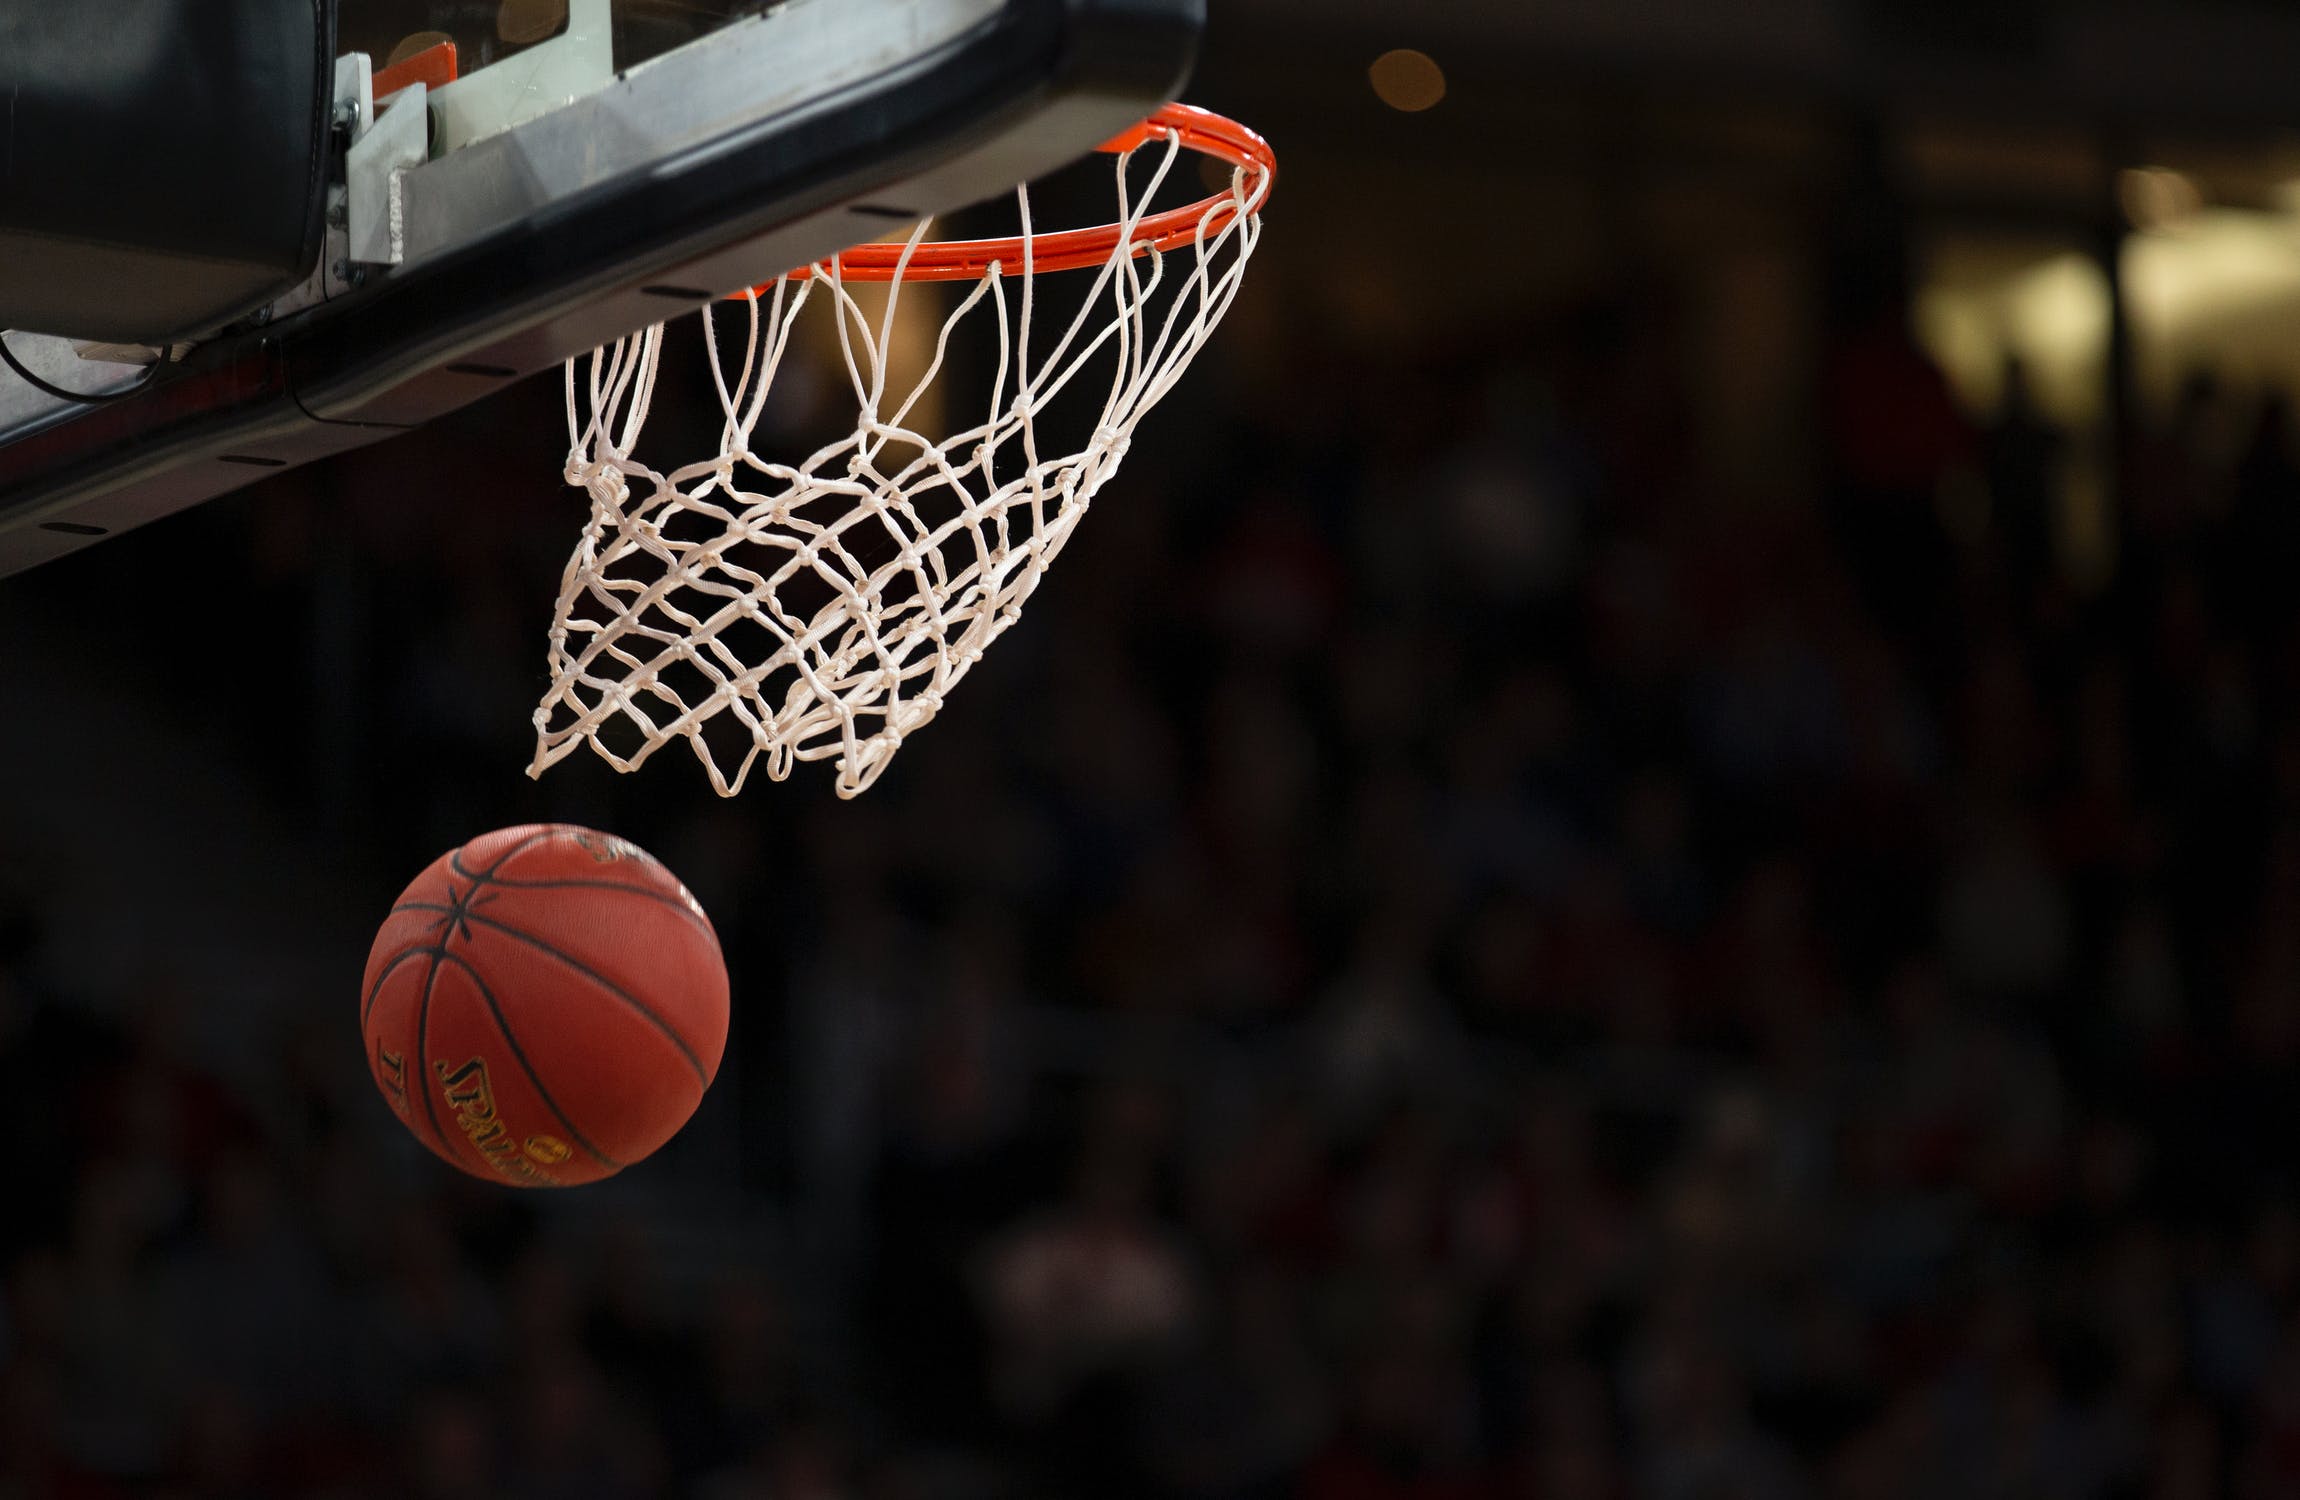 Betting on Basketball: How does it work